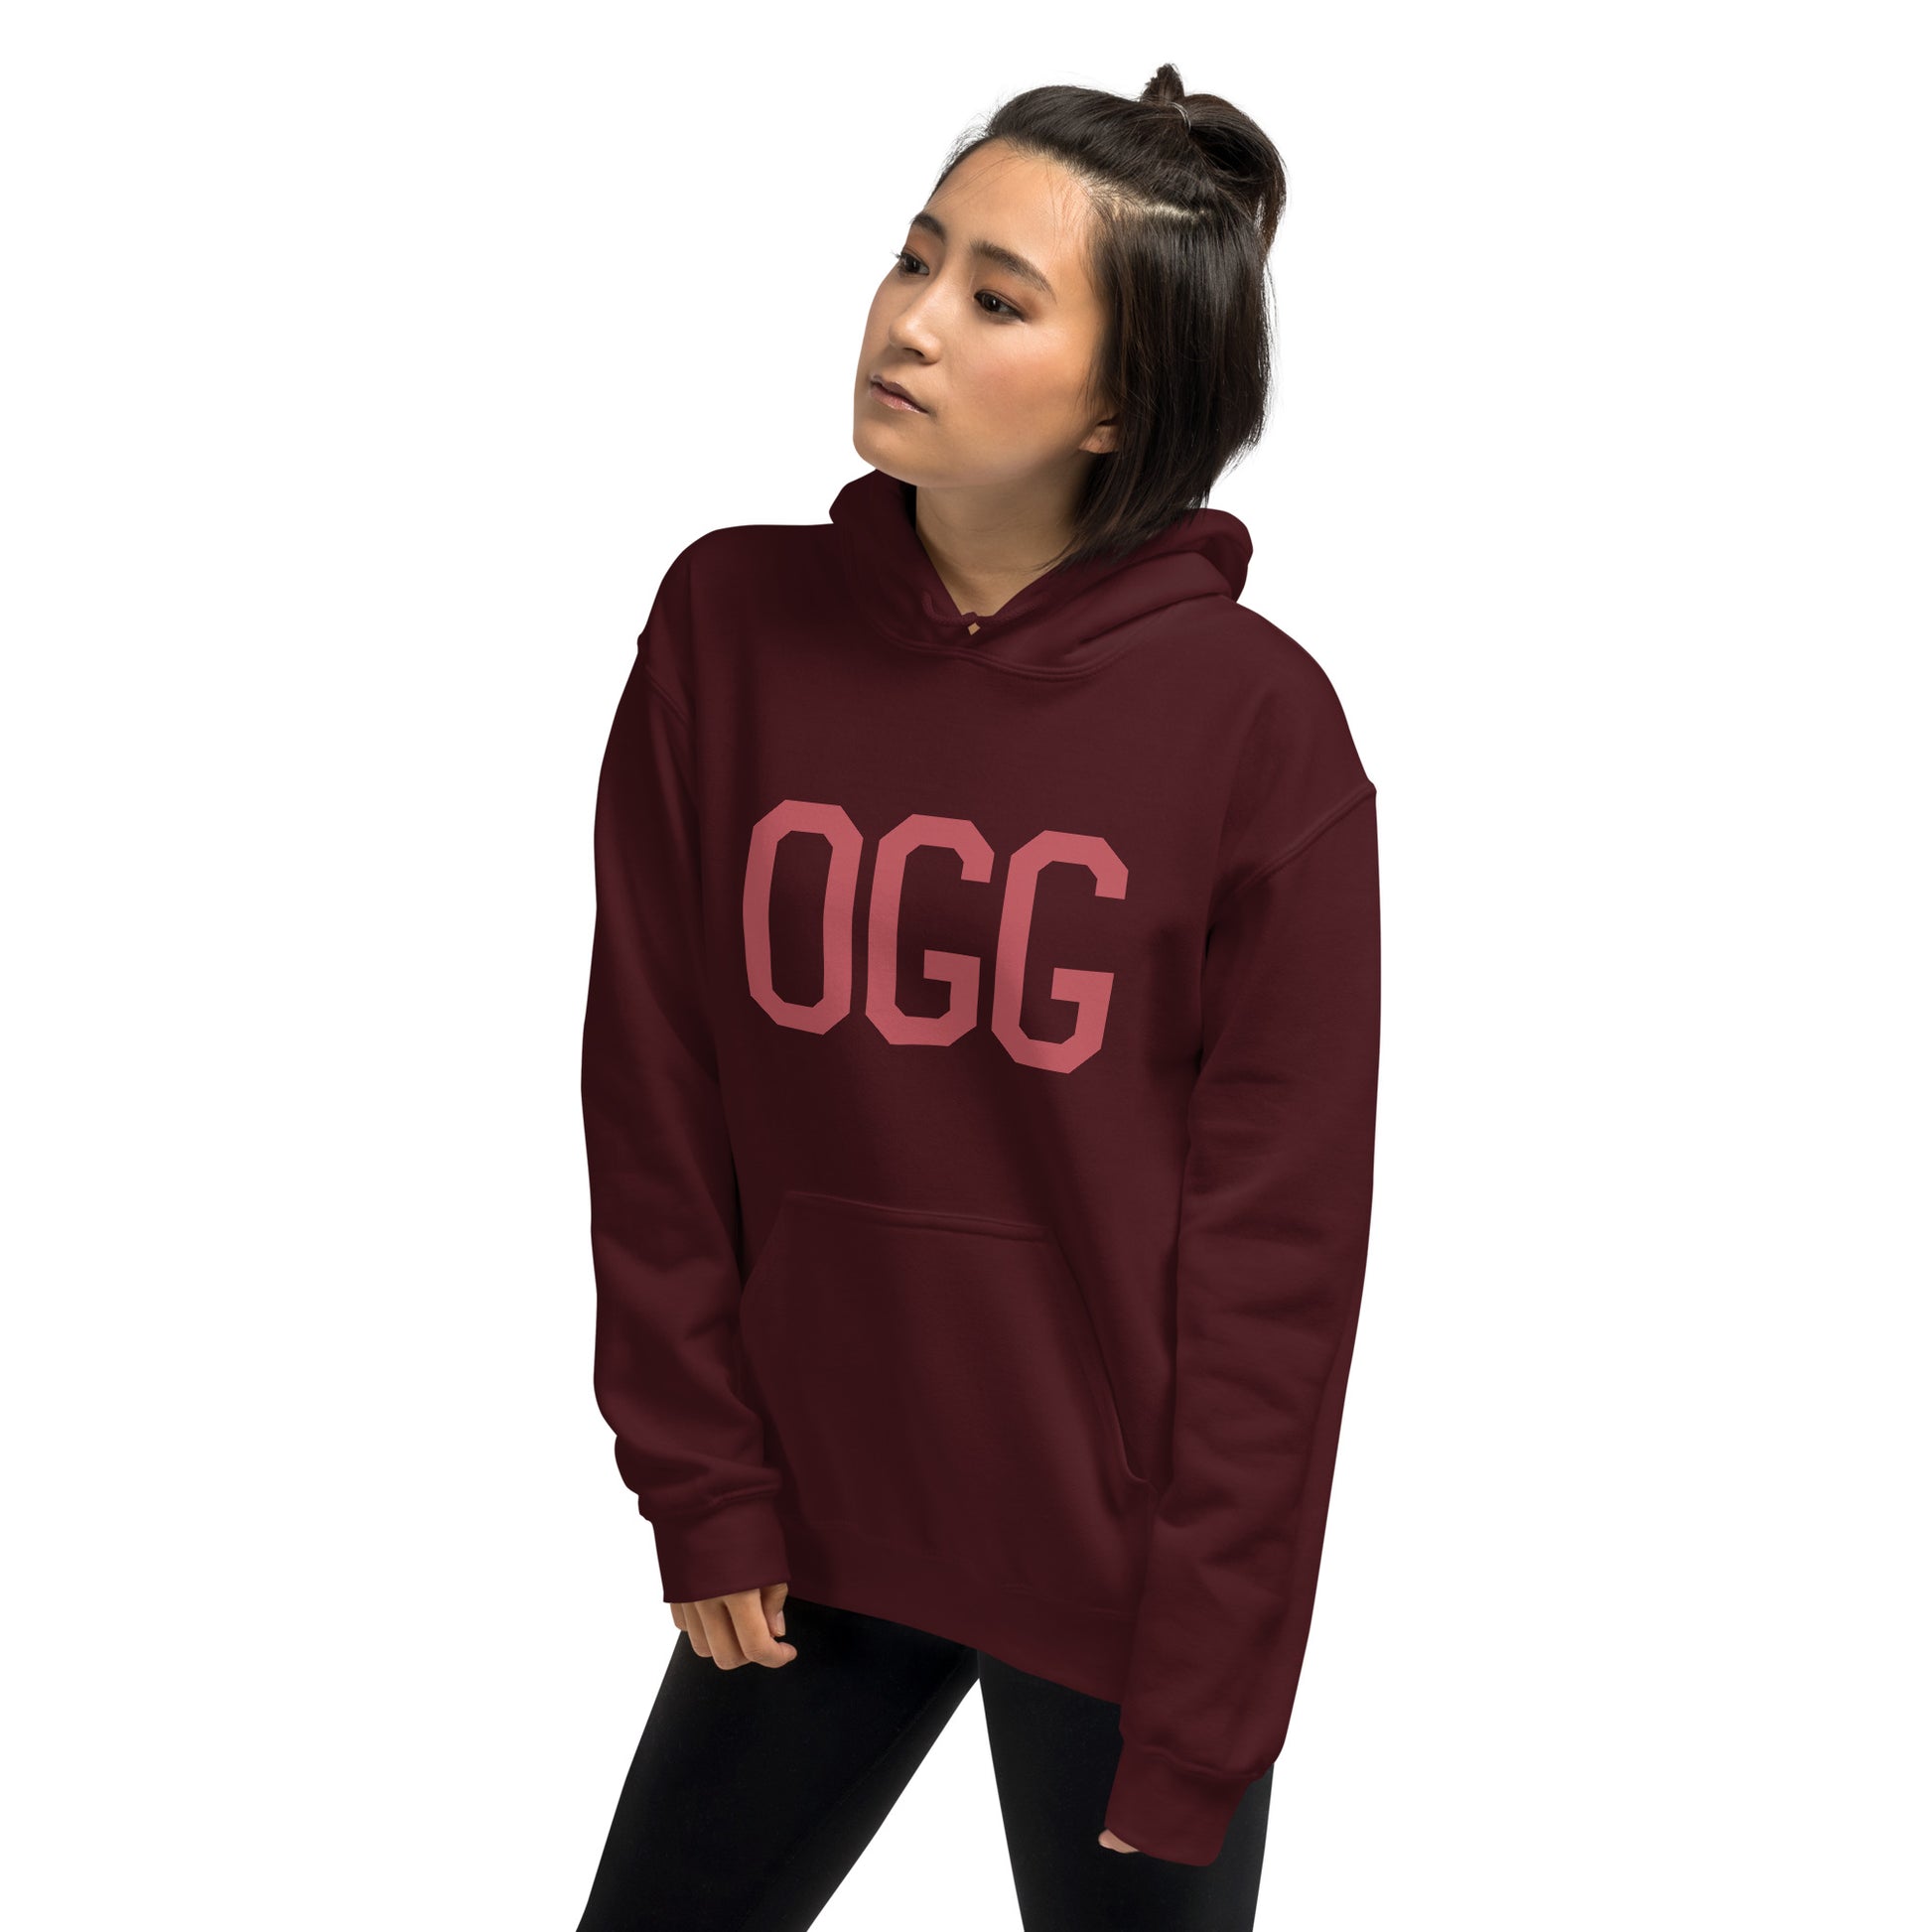 Aviation Enthusiast Hoodie - Deep Pink Graphic • OGG Maui • YHM Designs - Image 10